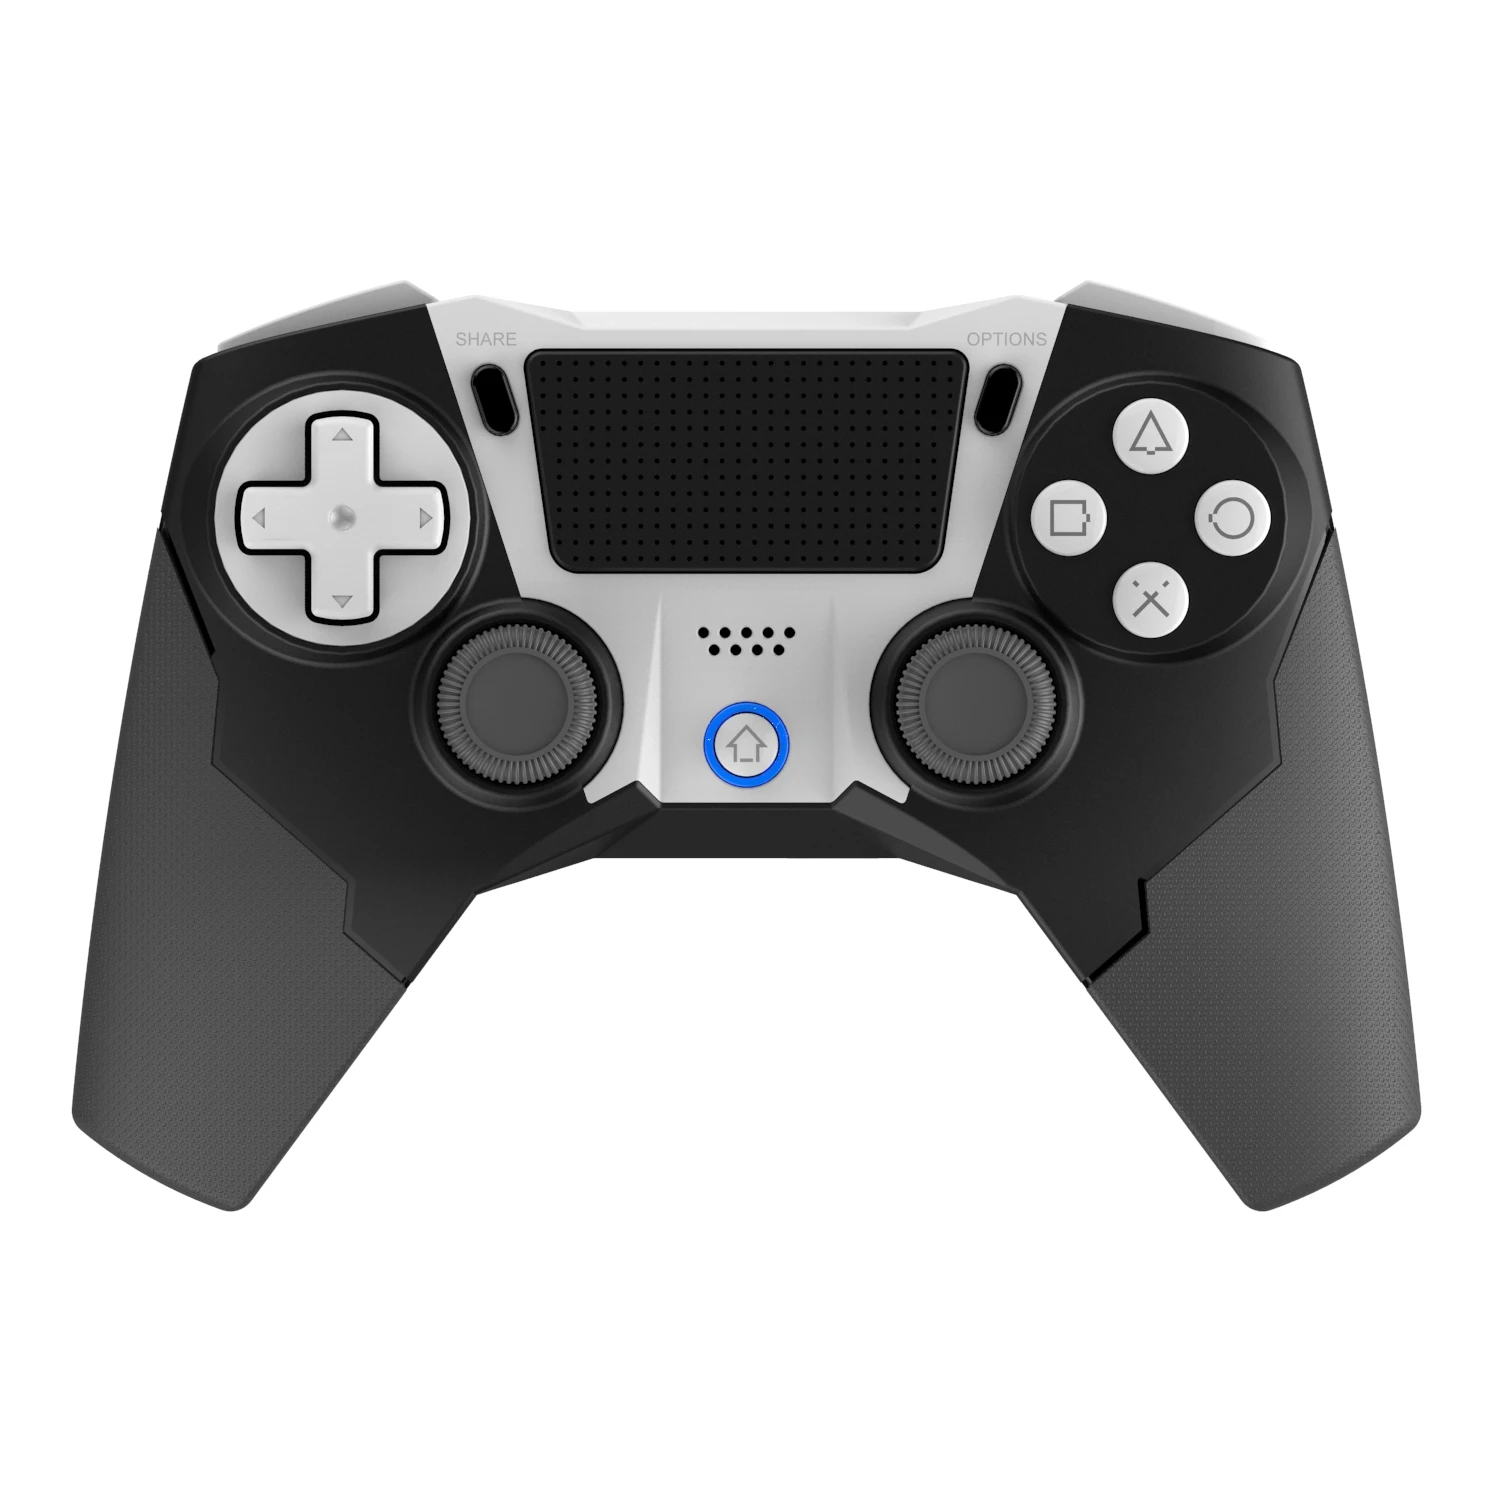 Bluetooth Wireless Mobile Game Console Controller for PS4 PS3 IOS13.0 PC Six axis gyroscope Button LED| | - AliExpress